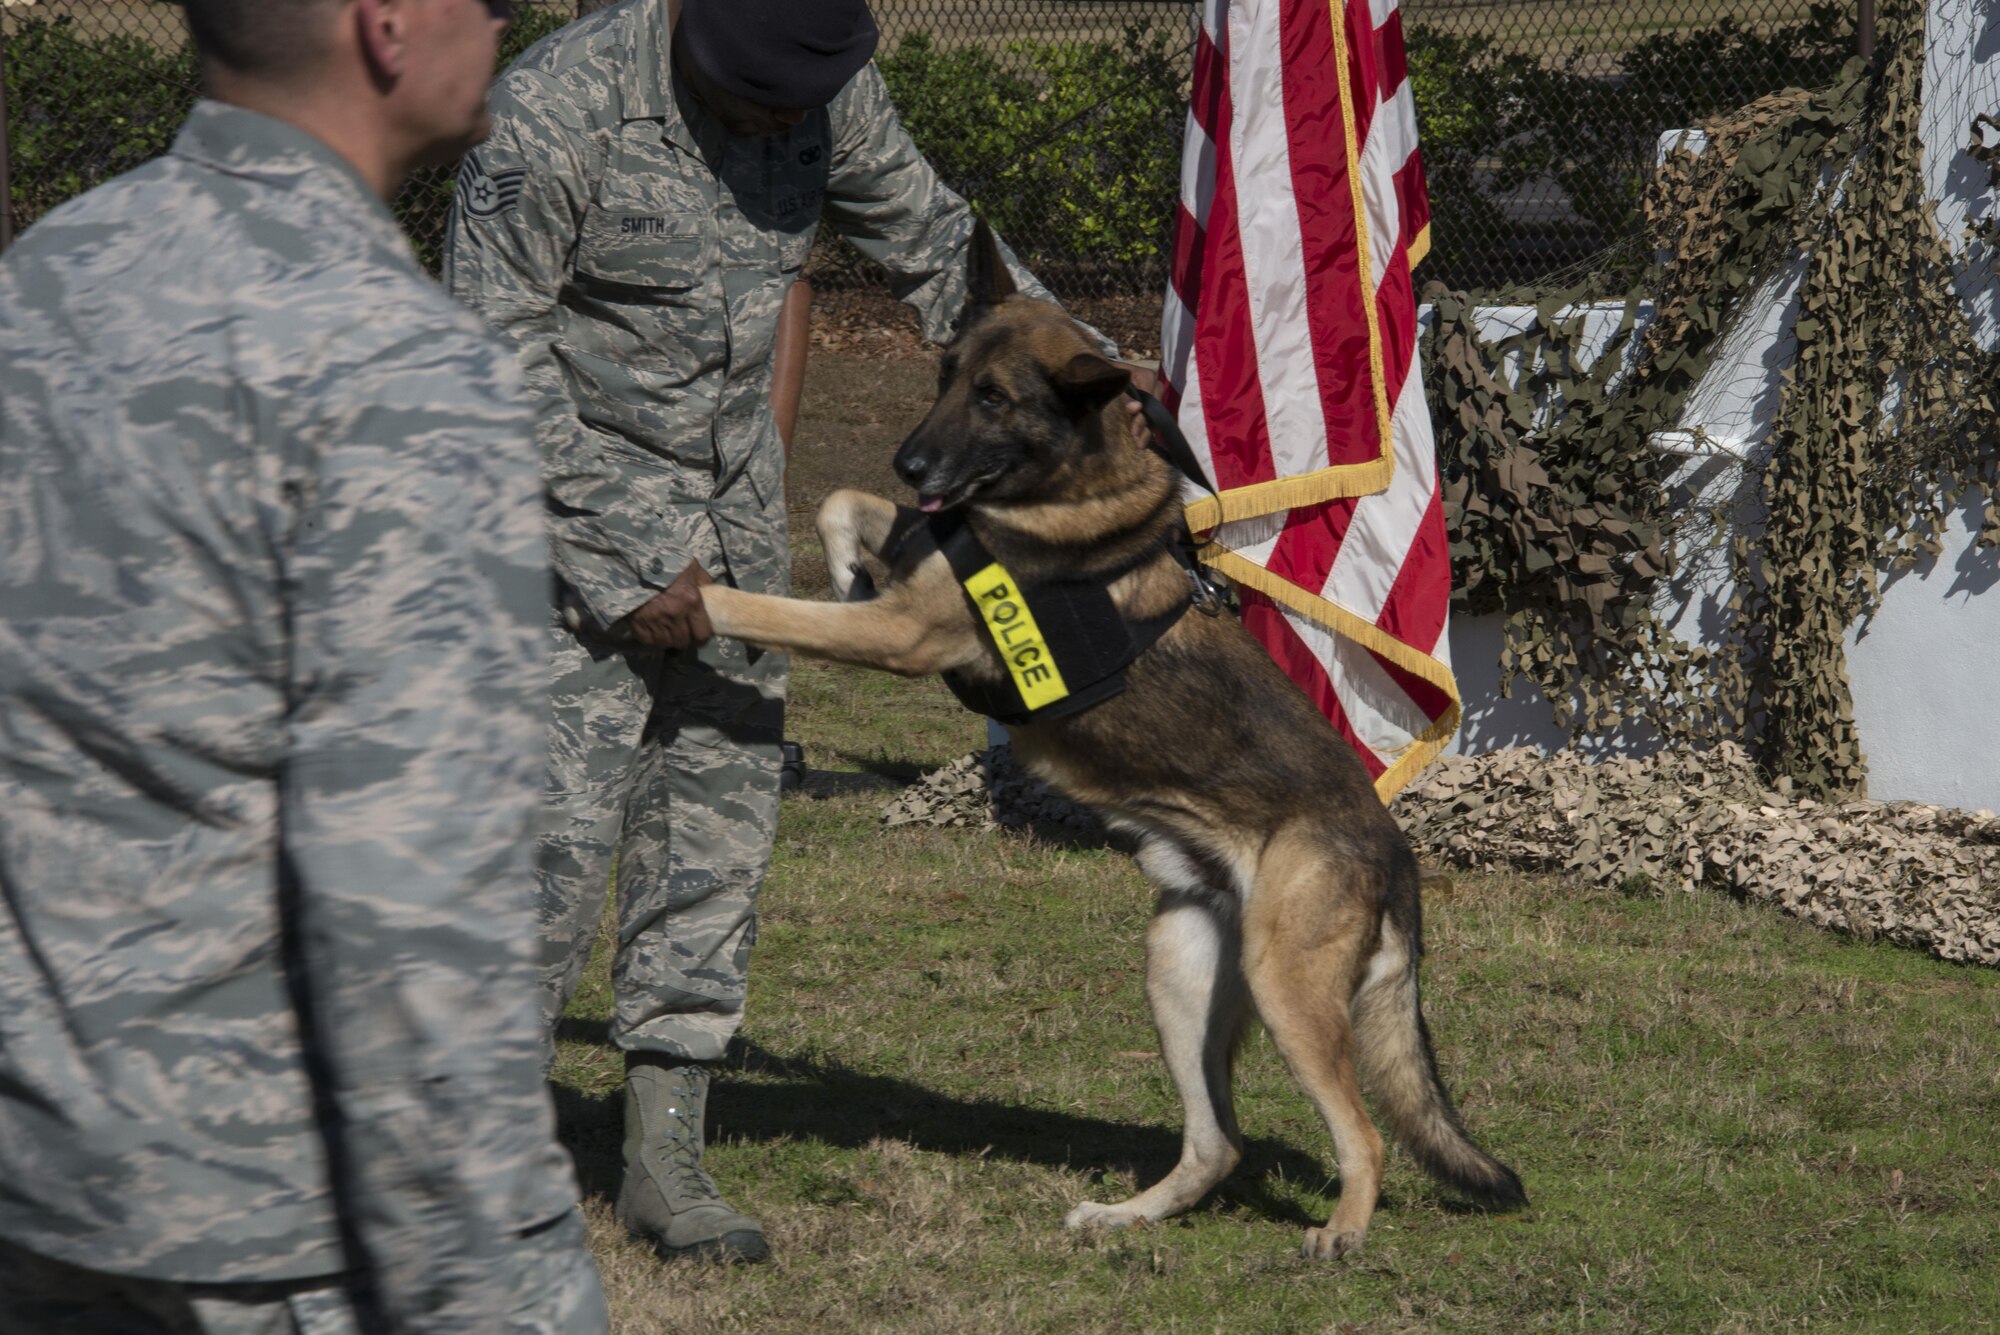 Military Working Dog  Rocky enjoys his retirement ceremony at Maxwell Air Force Base, Jan. 13, 2017.  Rocky was set to retire from military service at the end of October, 2016, but had to wait for final paperwork to be processed. He will join his former handler, Staff Sgt. Terrance Smith, their home couch. For more information on Rocky and his military service: http://www.maxwell.af.mil/News/Display/tabid/10067/Article/970080/mwd-rocky-is-taking-his-ball-and-going-home.aspx   (U.S. Air Force photo by Senior Airman William Blankenship)